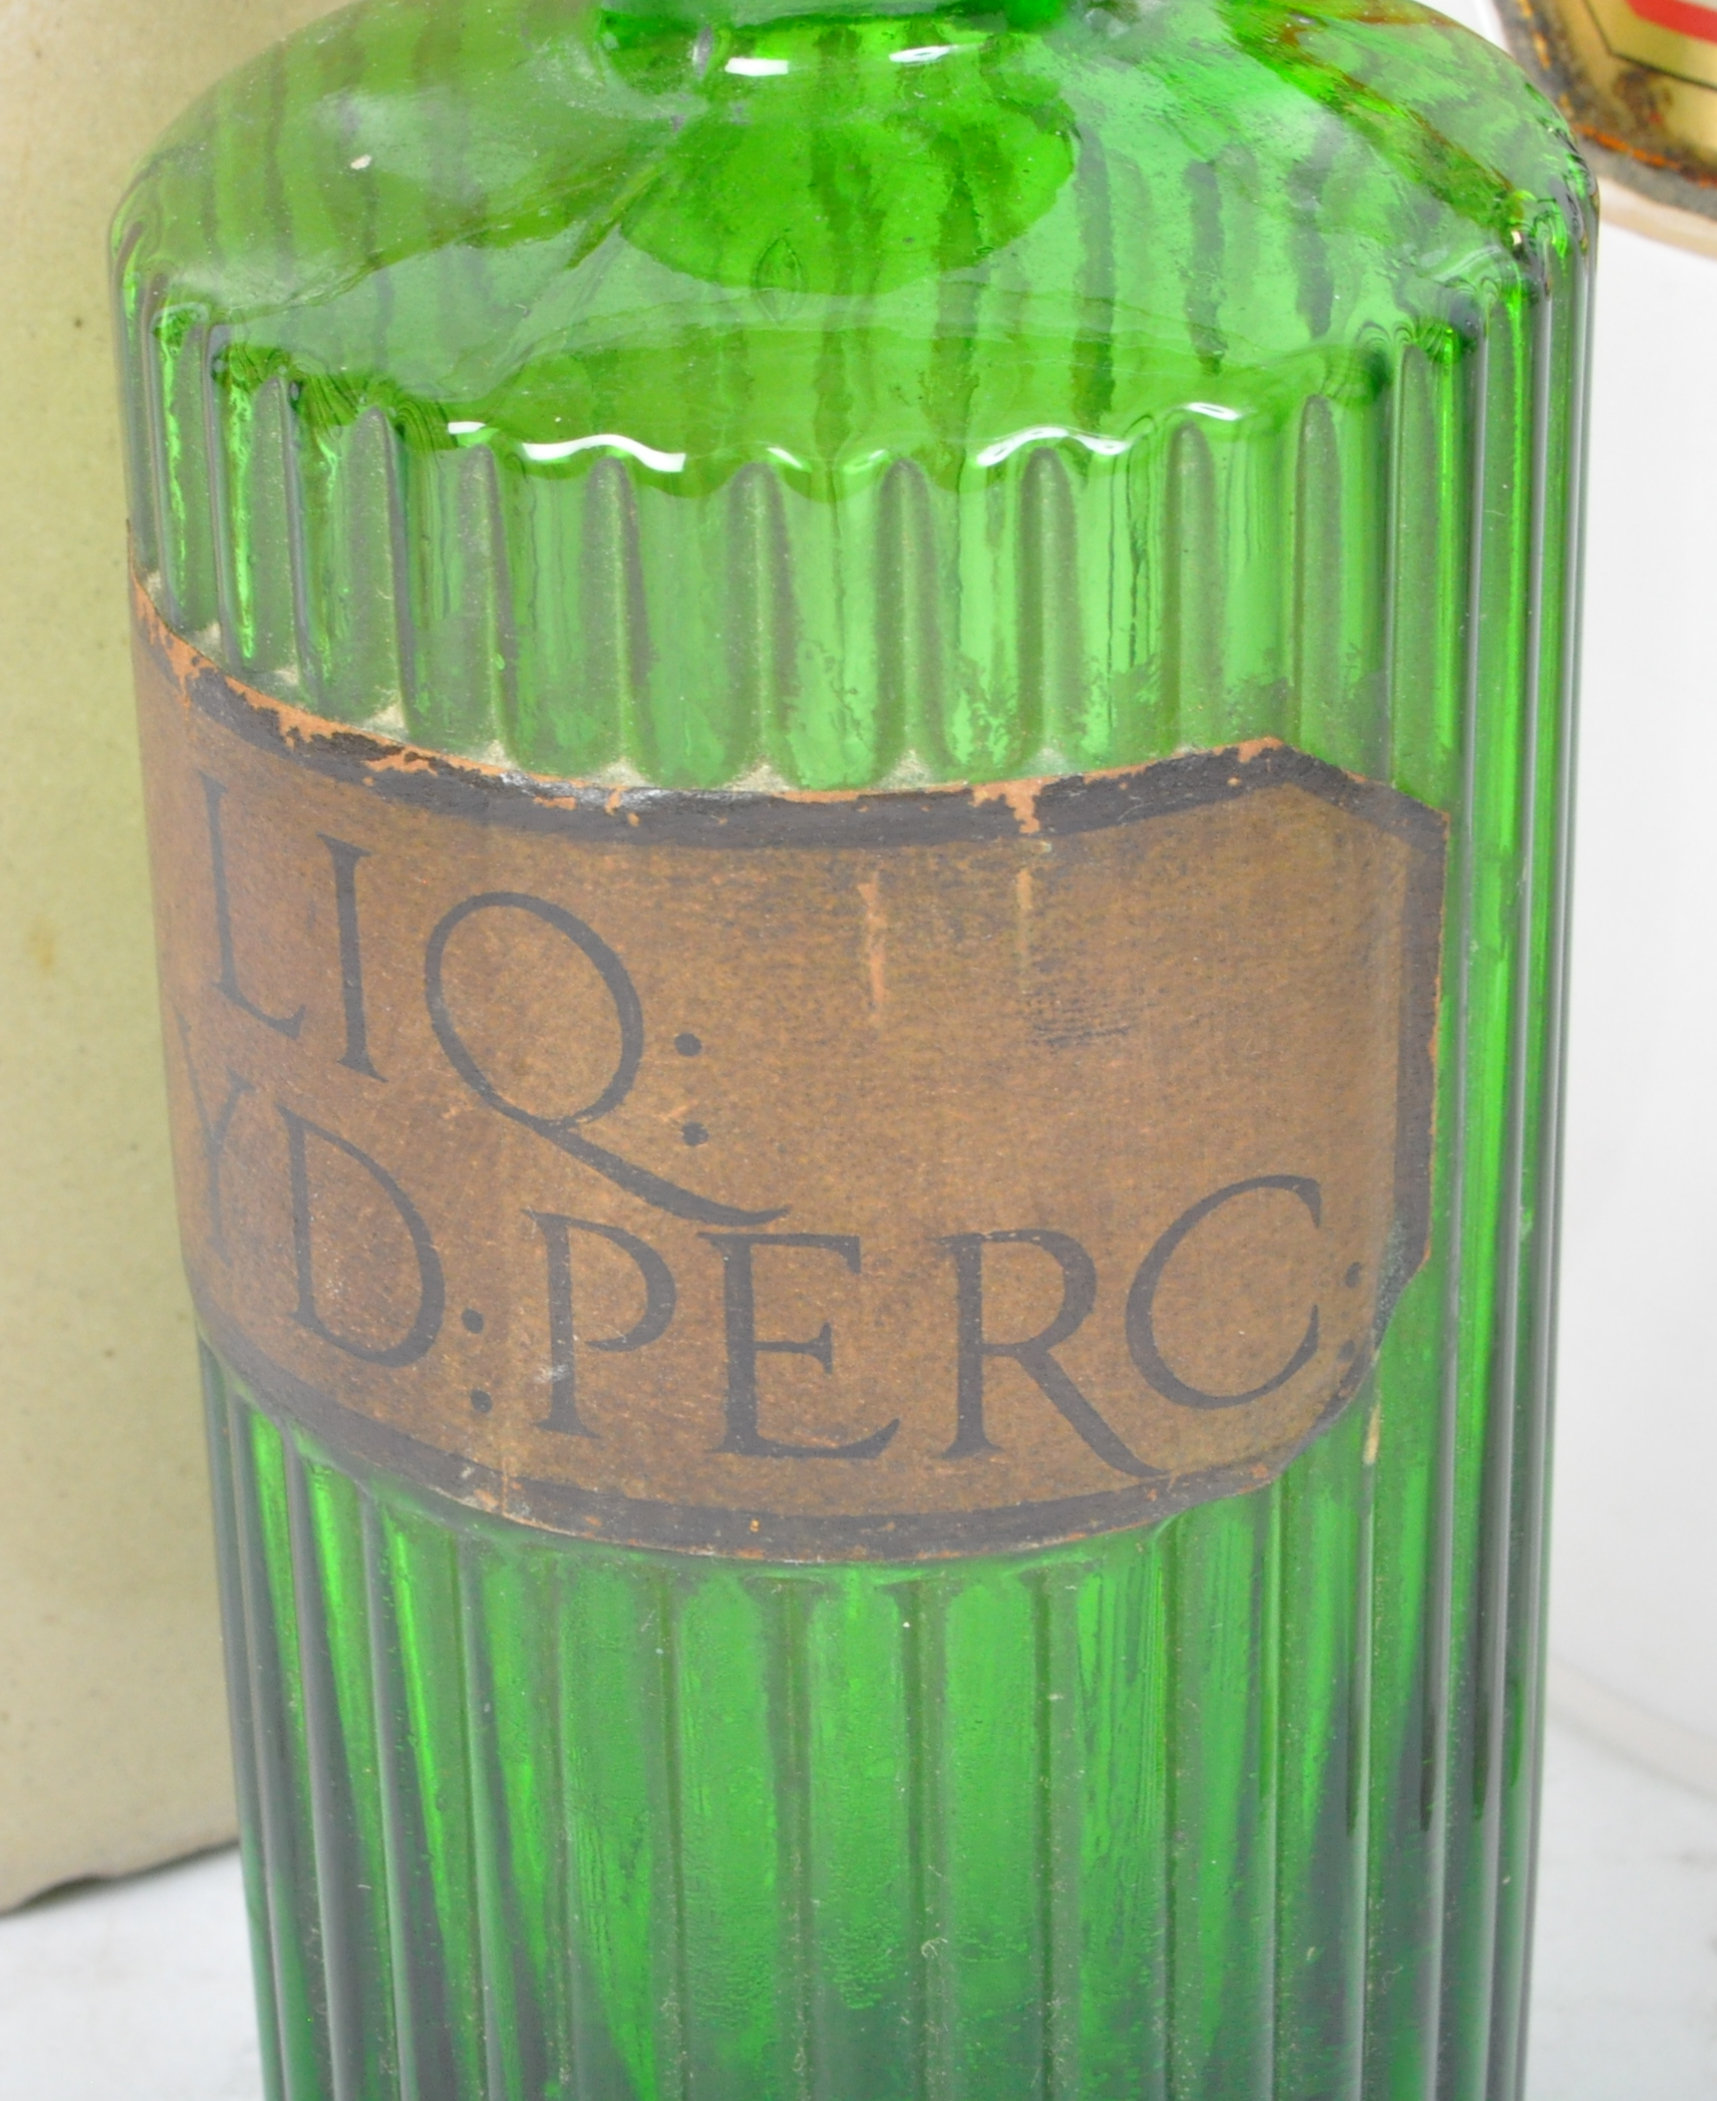 COLLECTION OF EARLY 20TH CENTURY PHARMACY GLASS BOTTLES - Image 5 of 5